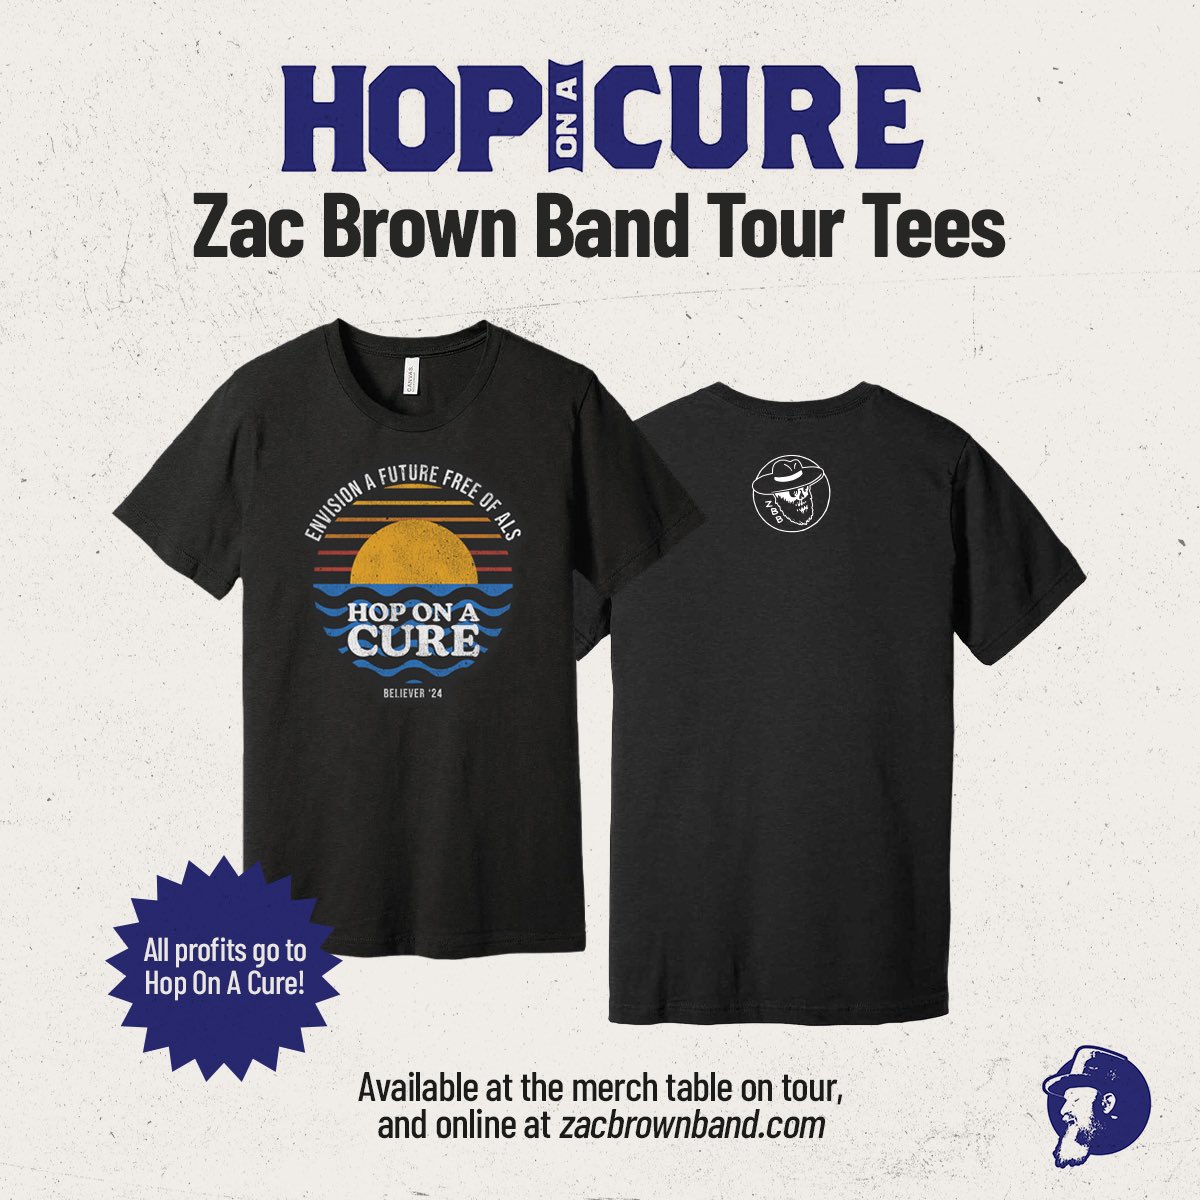 #Minneapolis! Get your Hop On A Cure @zacbrownband tour tees tonight:
💙 section 121 merch stand 
💙 section 138 merch stand

#zamily #cureALS #believeinacure💙